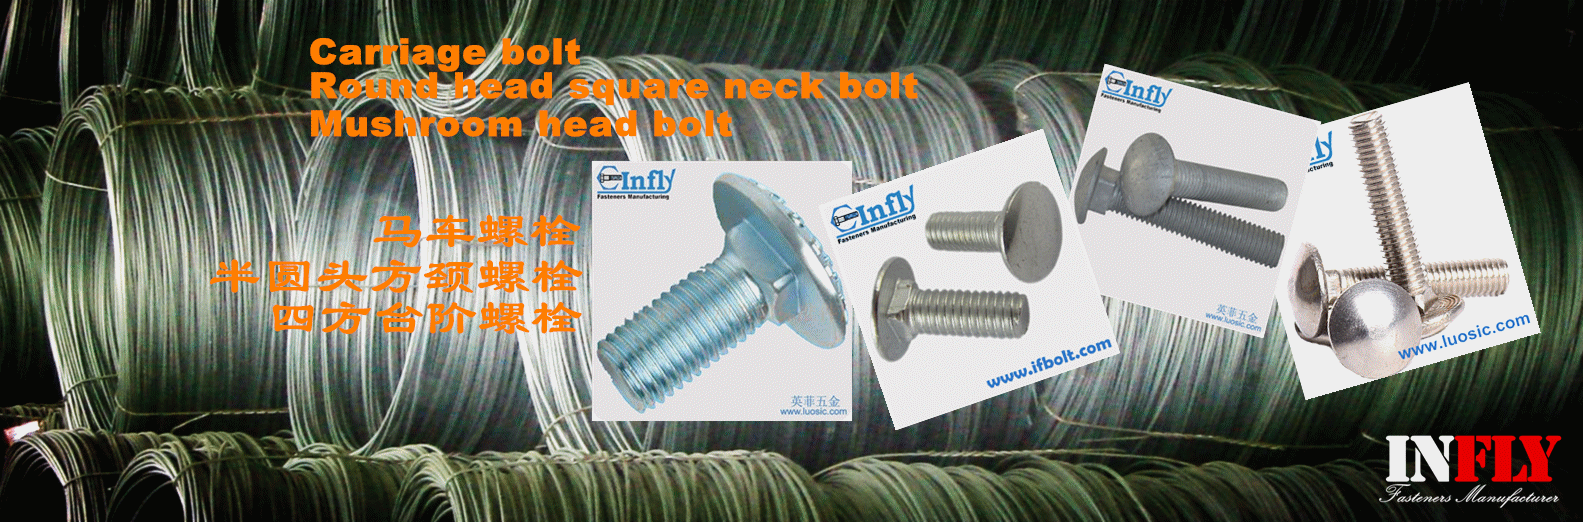 a manufacturer and factory of Carriage bolt round,pan,mushroom head square neck bolt supplier